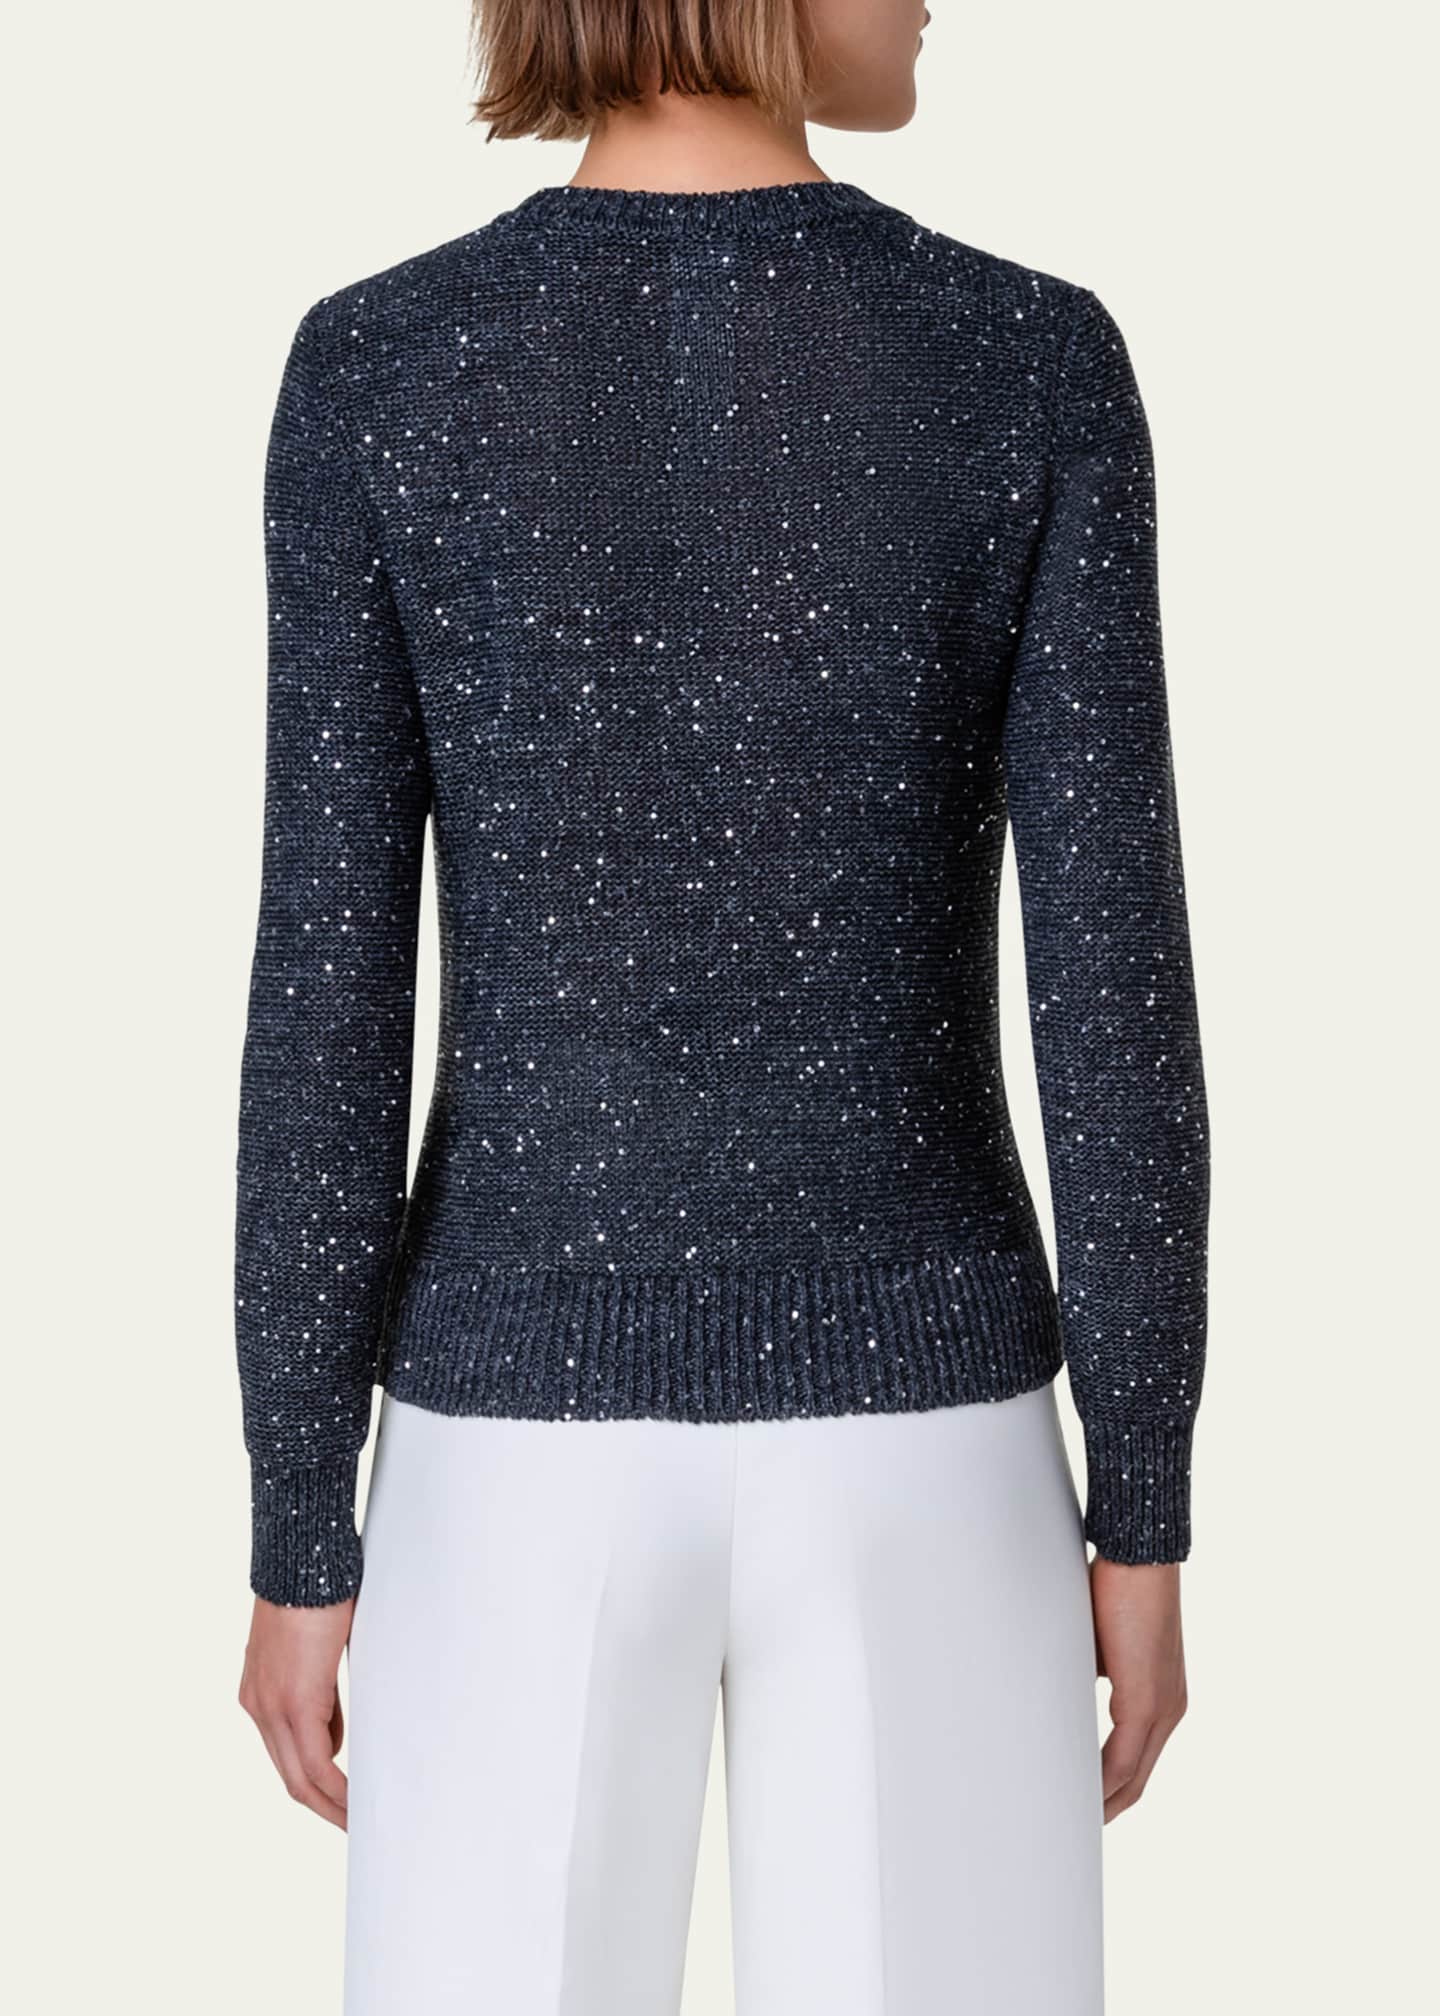 Akris Linen Cotton Knit Pullover with Sequins - Bergdorf Goodman